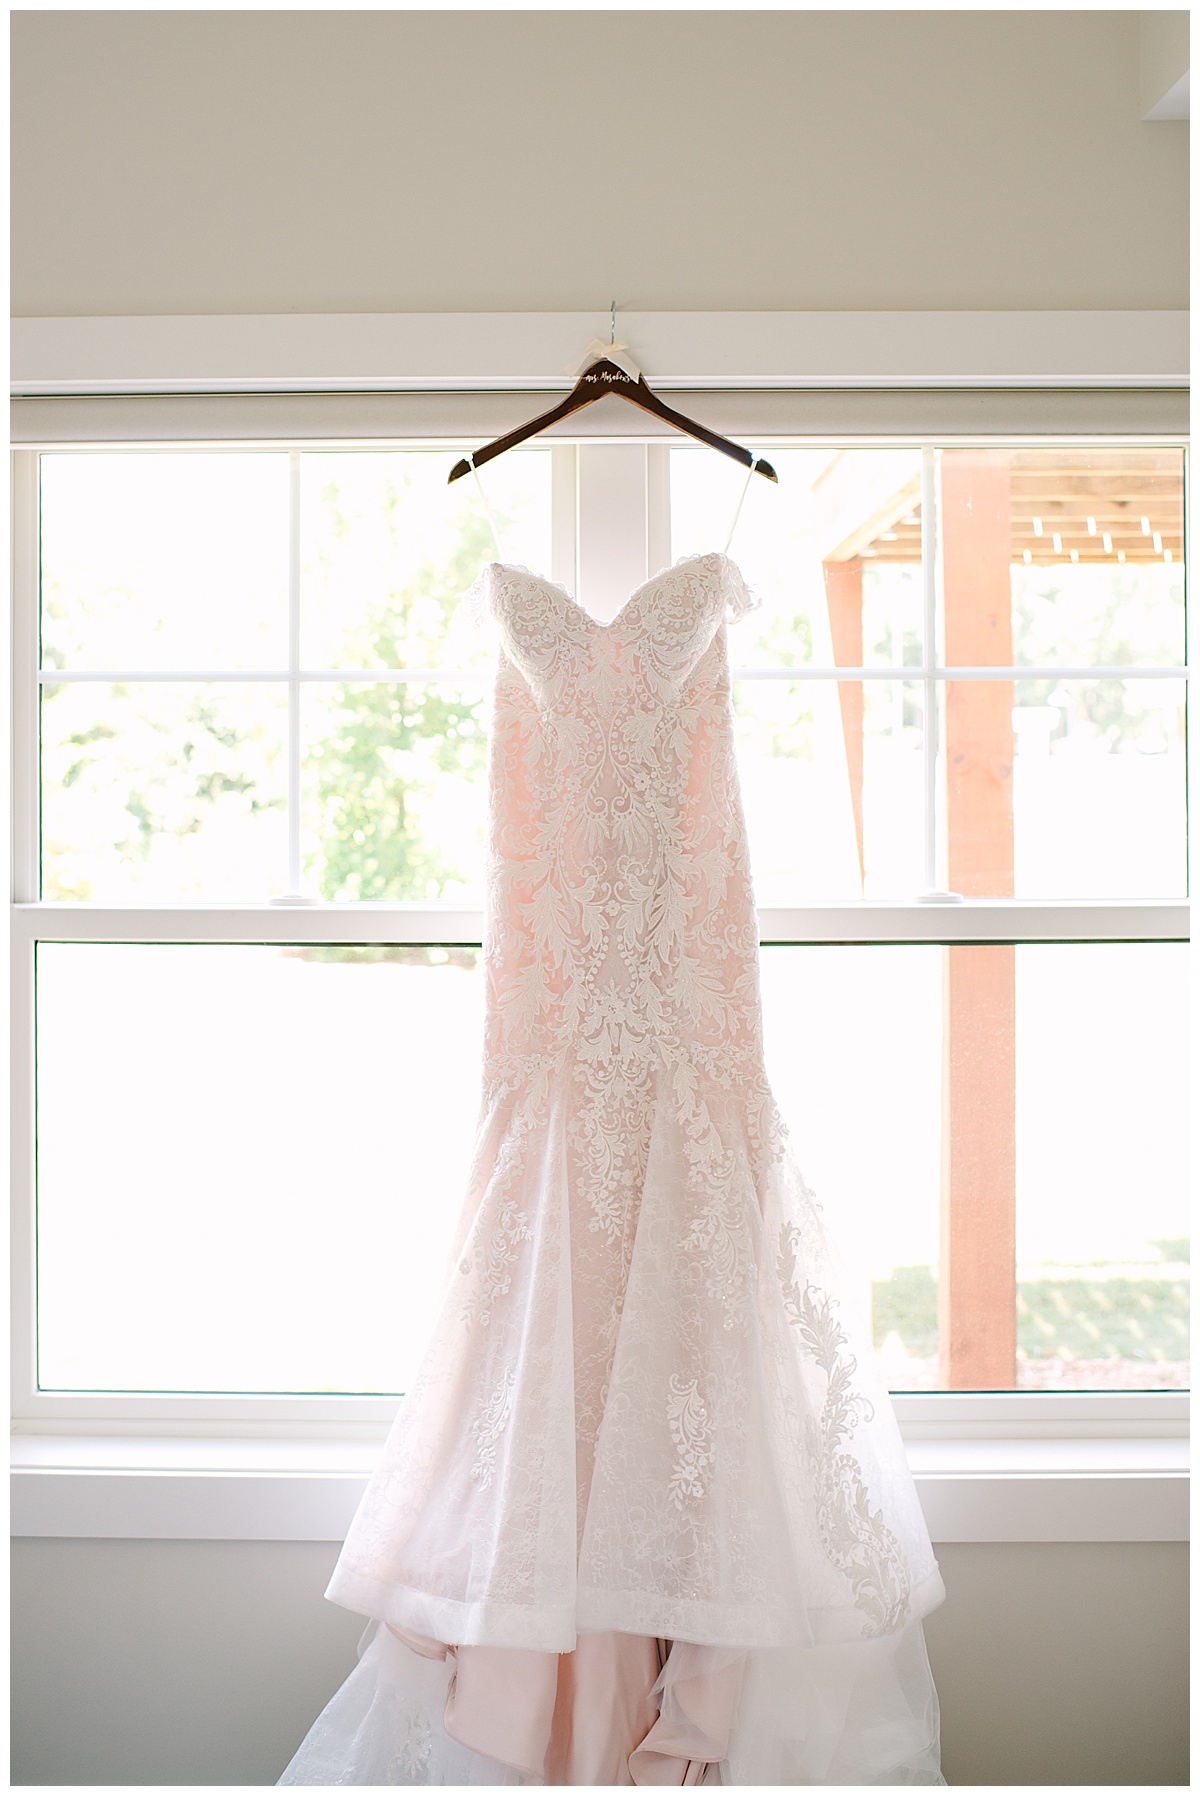 Bridal gown in front of window by Brittany Emerson Photography